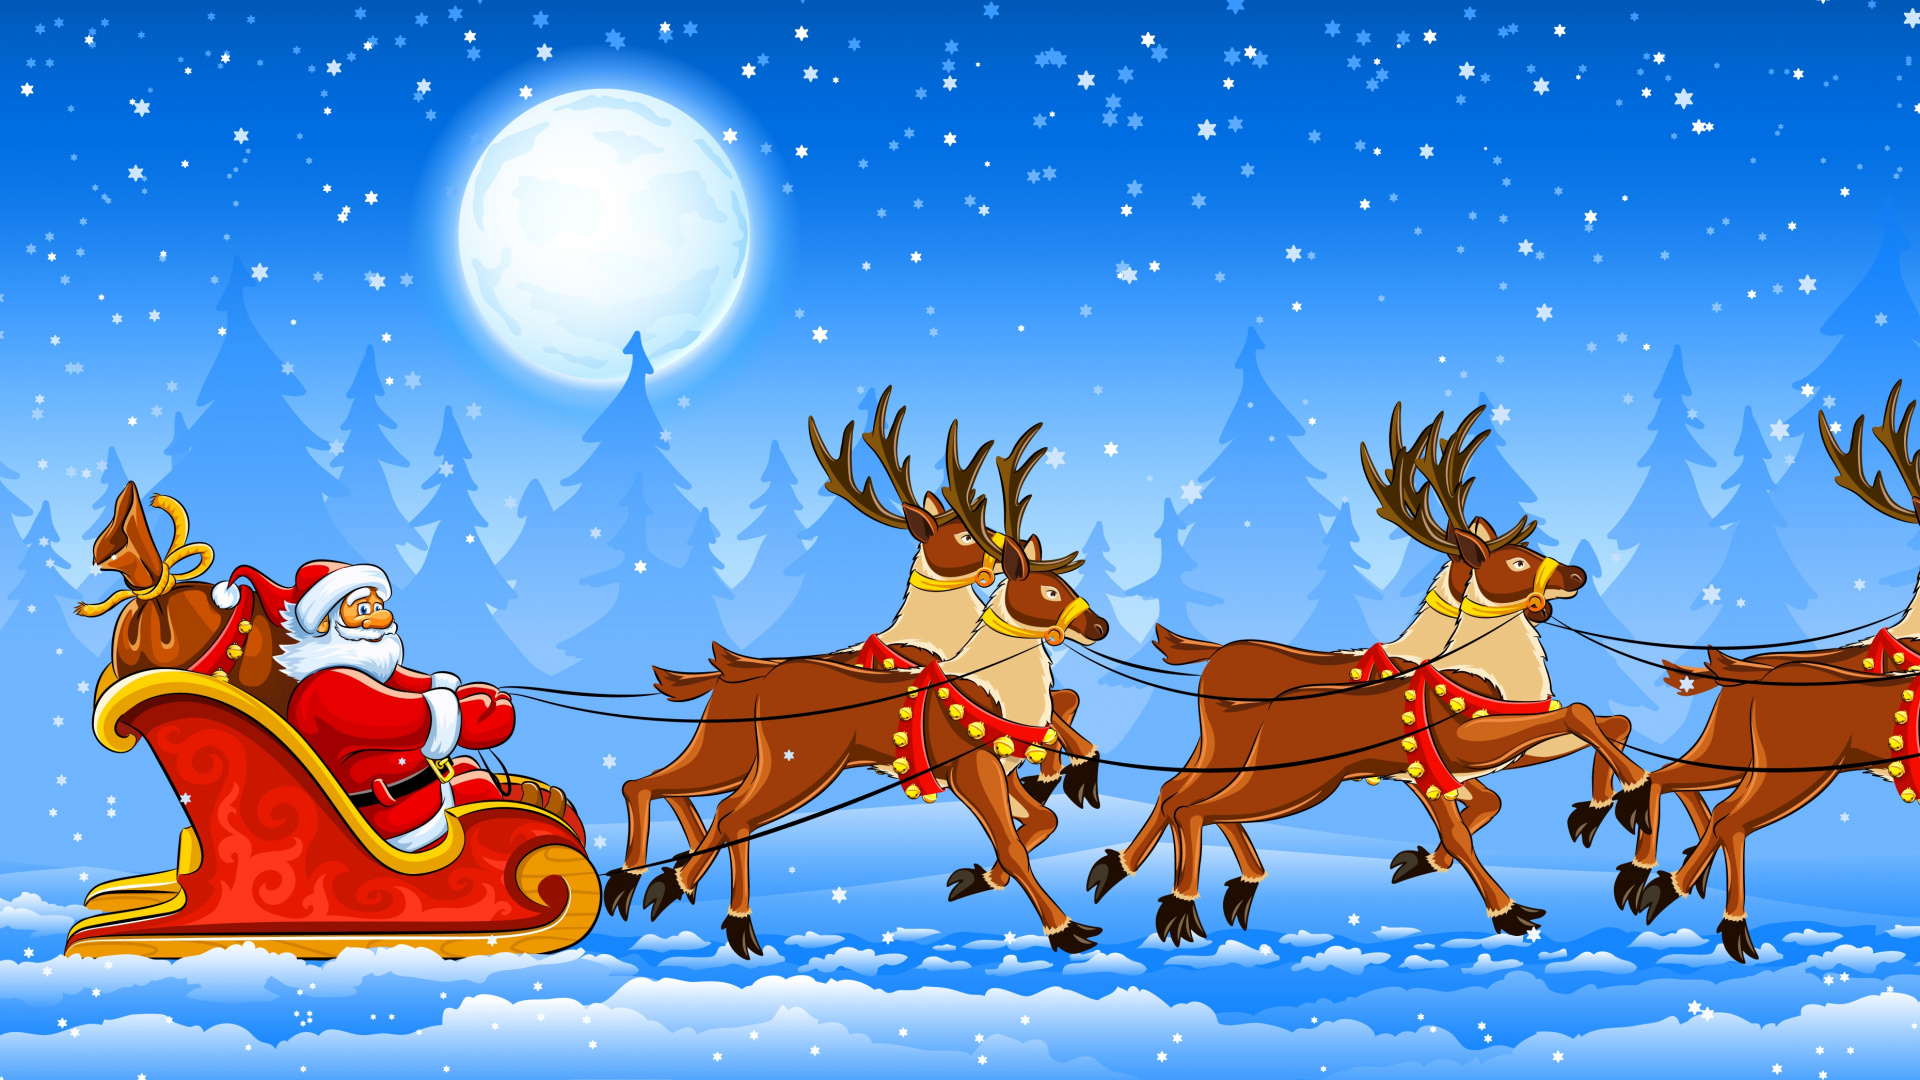 Reindeer, Santa Claus, Sled, Christmas Day, Vector Graphics. Wallpaper in 1920x1080 Resolution